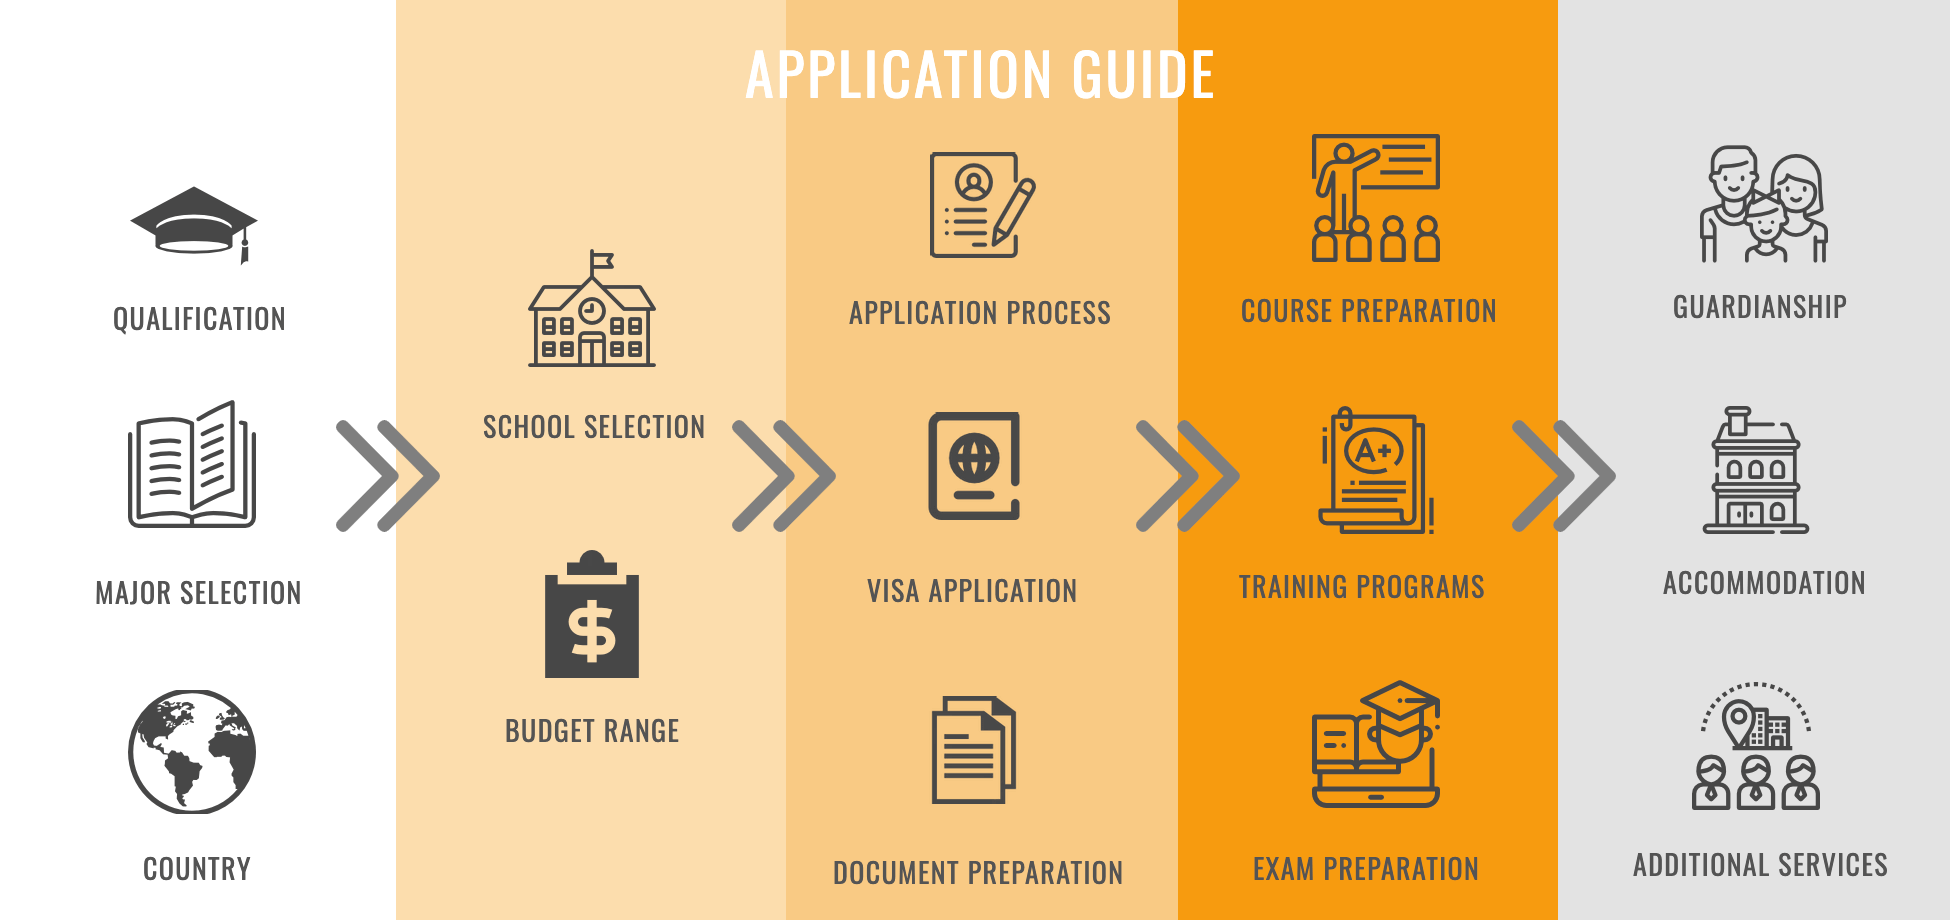 Application guide 8